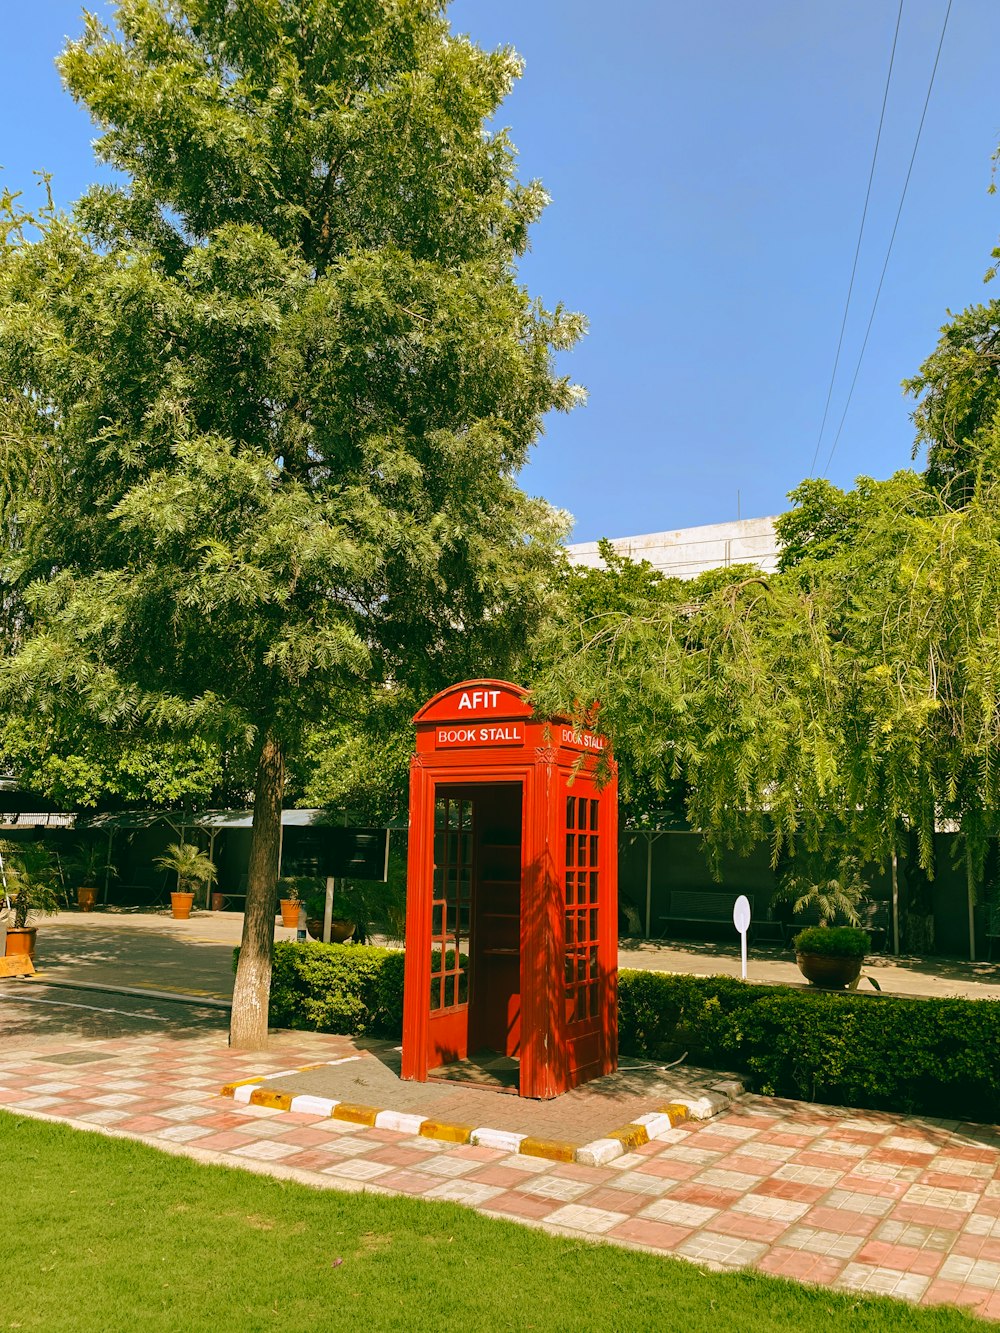 a red telephone booth in a park